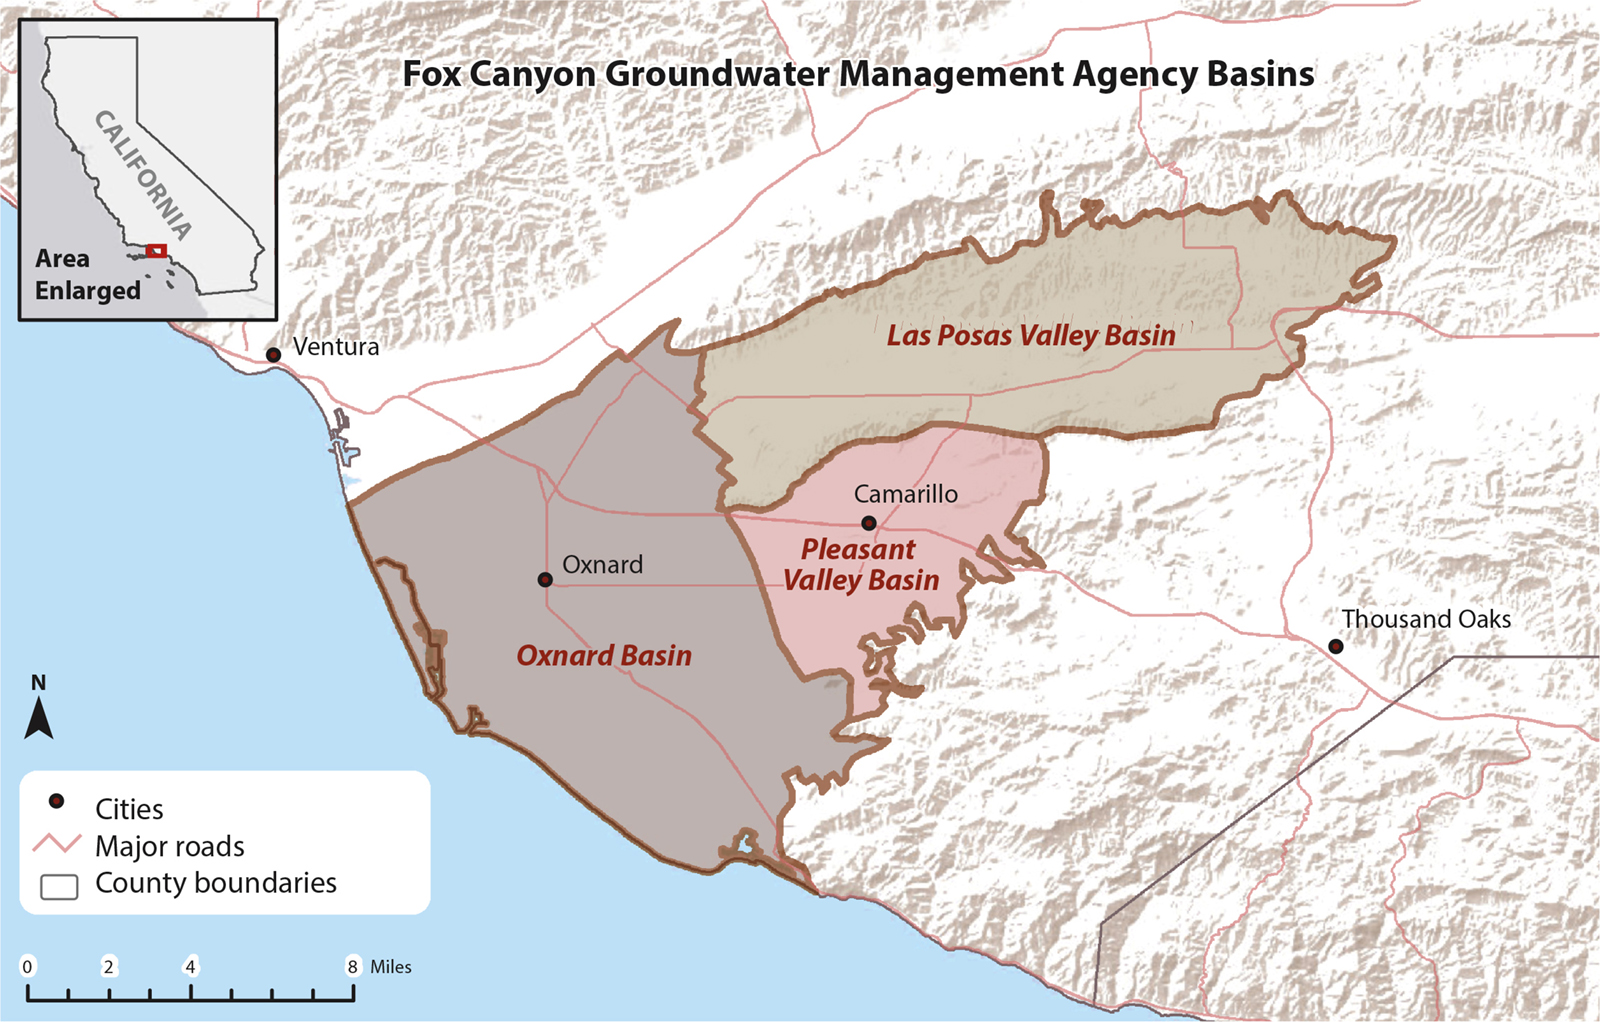 Fox Canyon Groundwater Management Agency (FCGMA) is a Special Act District created by the California legislature in 1982 to address seawater intrusion in three coastal basins in Ventura County. FCGMA was officially designated as the groundwater sustainability agency (GSA) for the three basins with the passage of the Sustainable Groundwater Management Act (SGMA) in 2014. Fox Canyon growers are facing pumping cuts of 40% or more under SGMA.